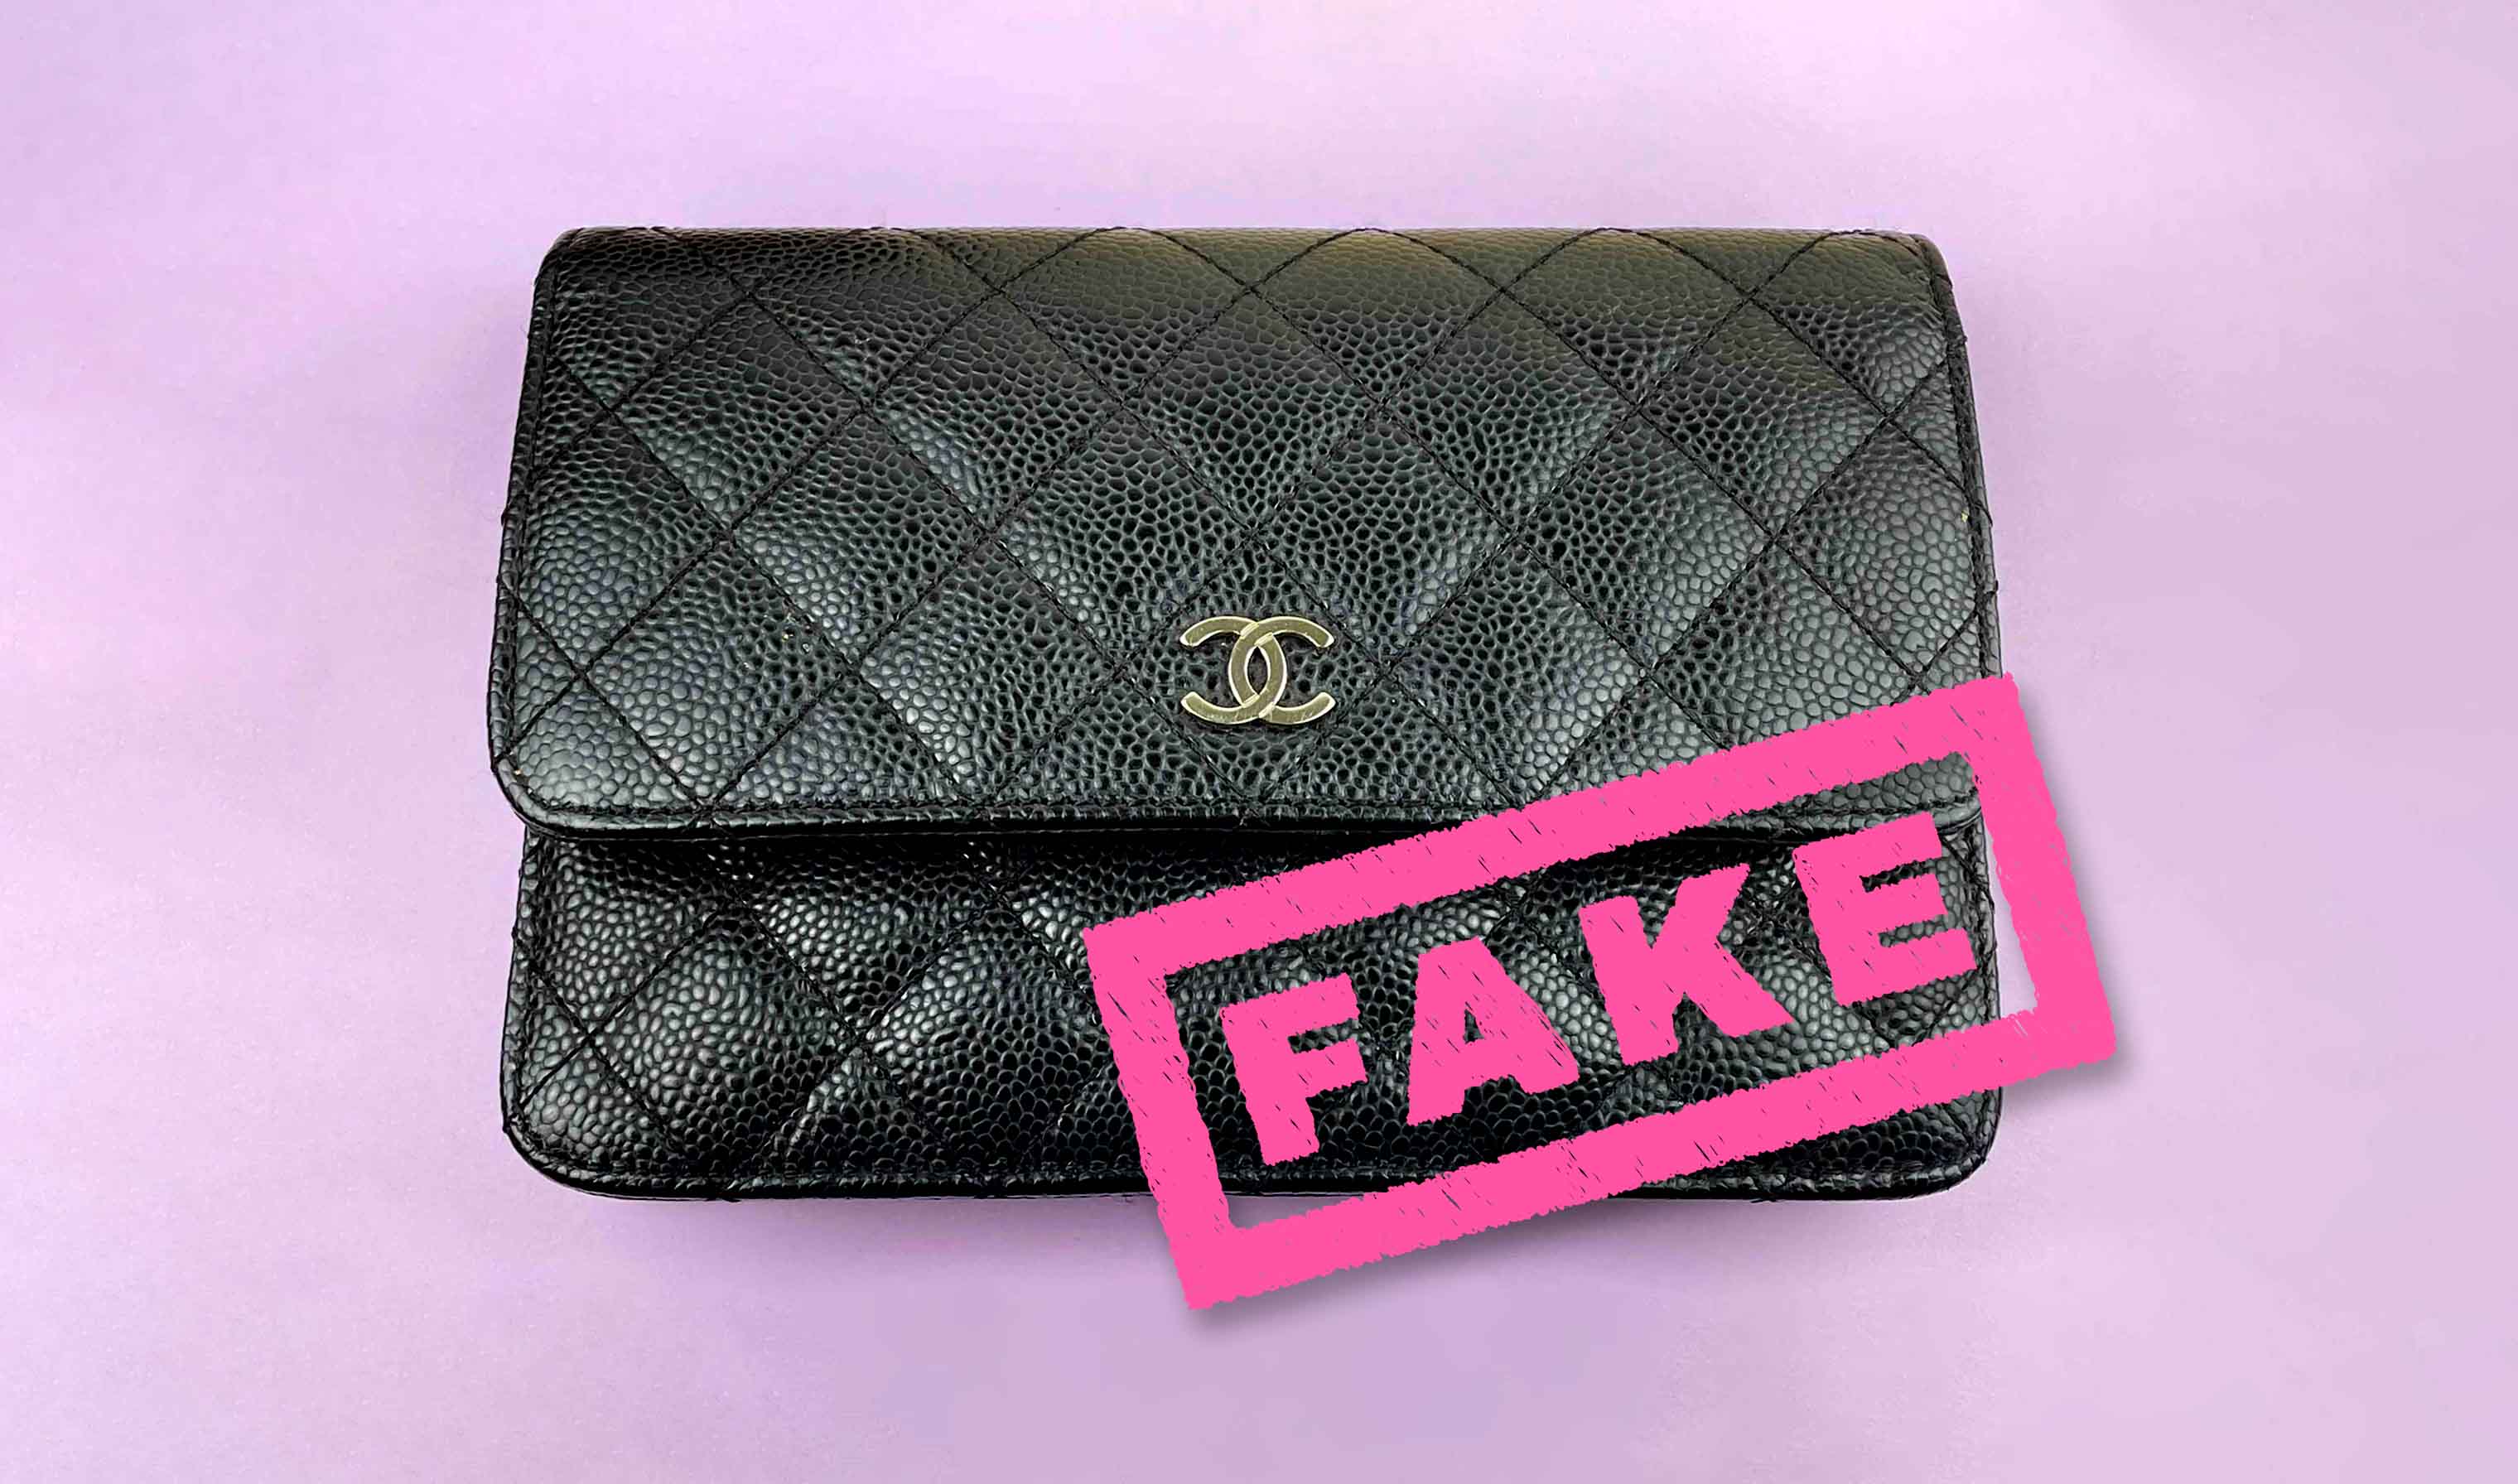 how to know real chanel bag